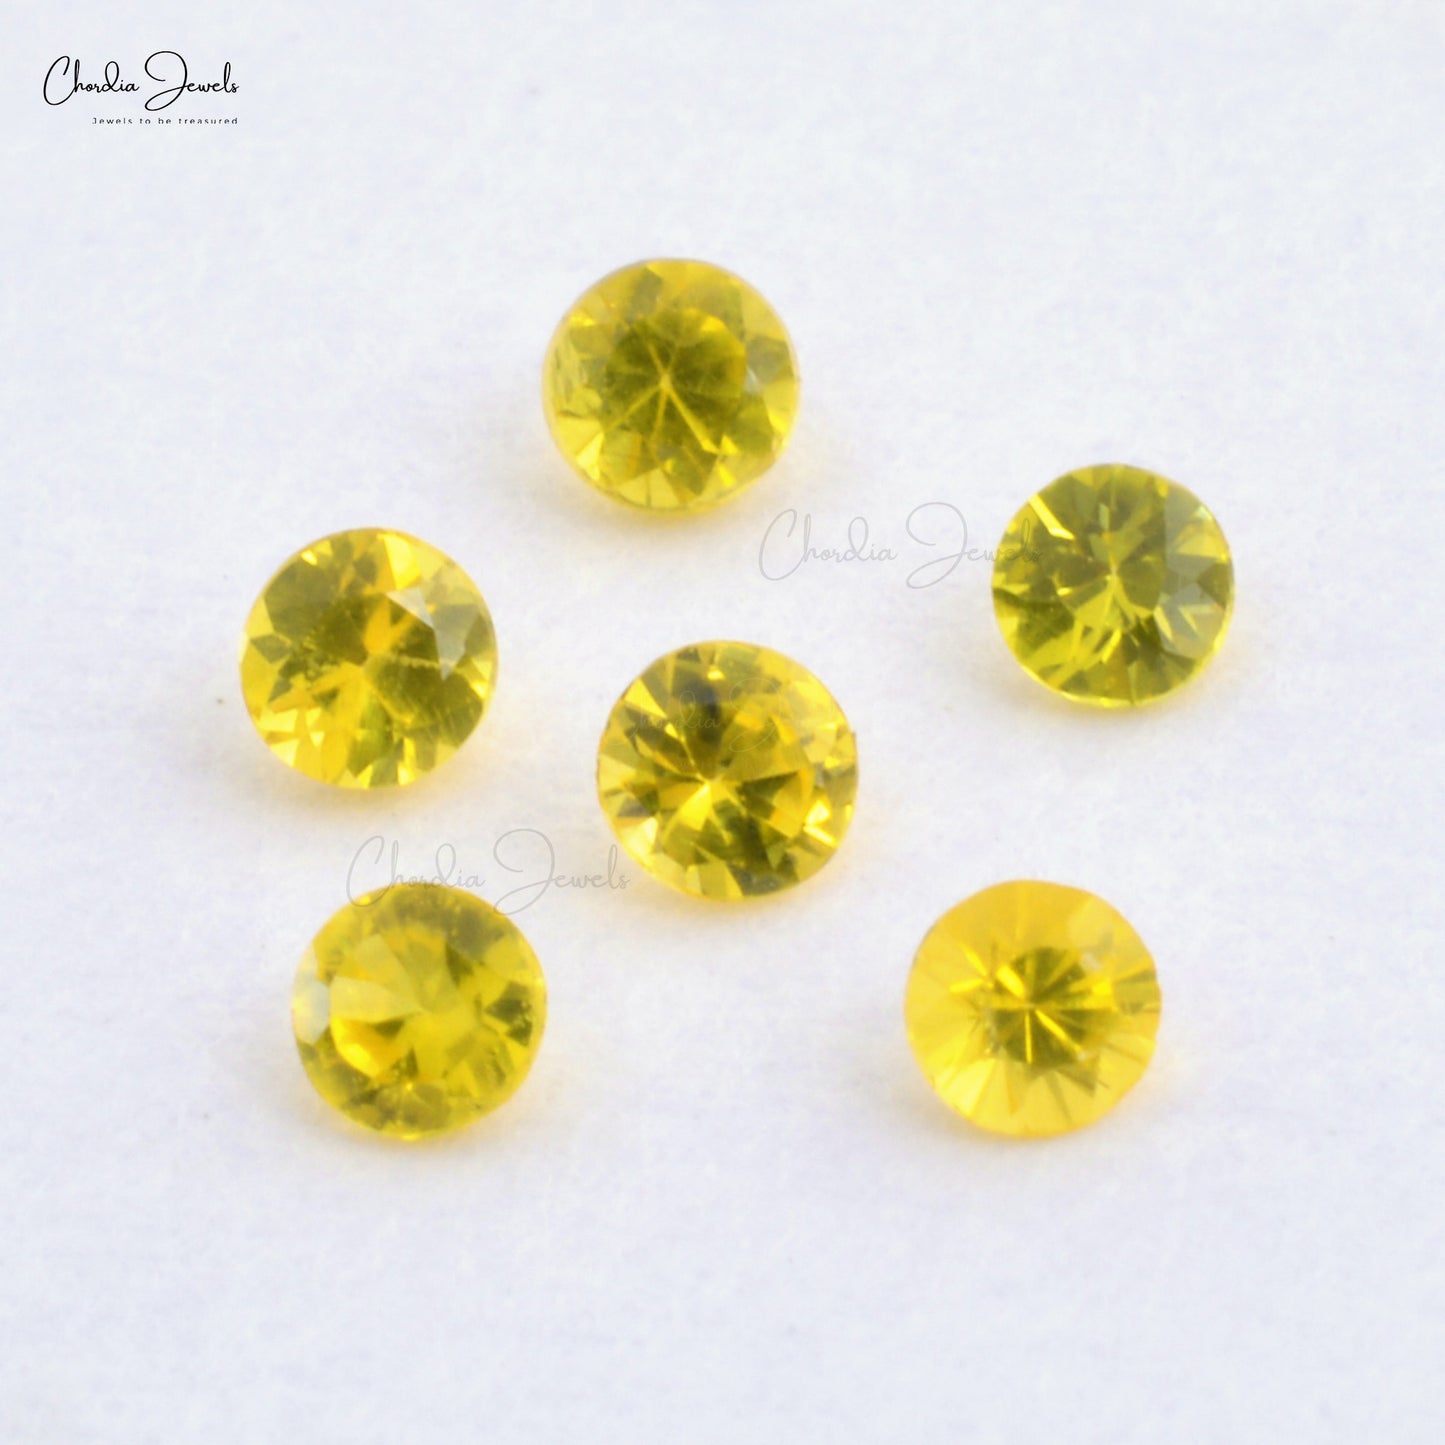 Top Quality 4mm, 4.50mm Precious Yellow Sapphire Gemstones. Weight: 0.23 - 0.36 Carats. Stone Quality: AAA Grade. Stone Cut: Excellent, Precious Gemstones from Chordia Jewels